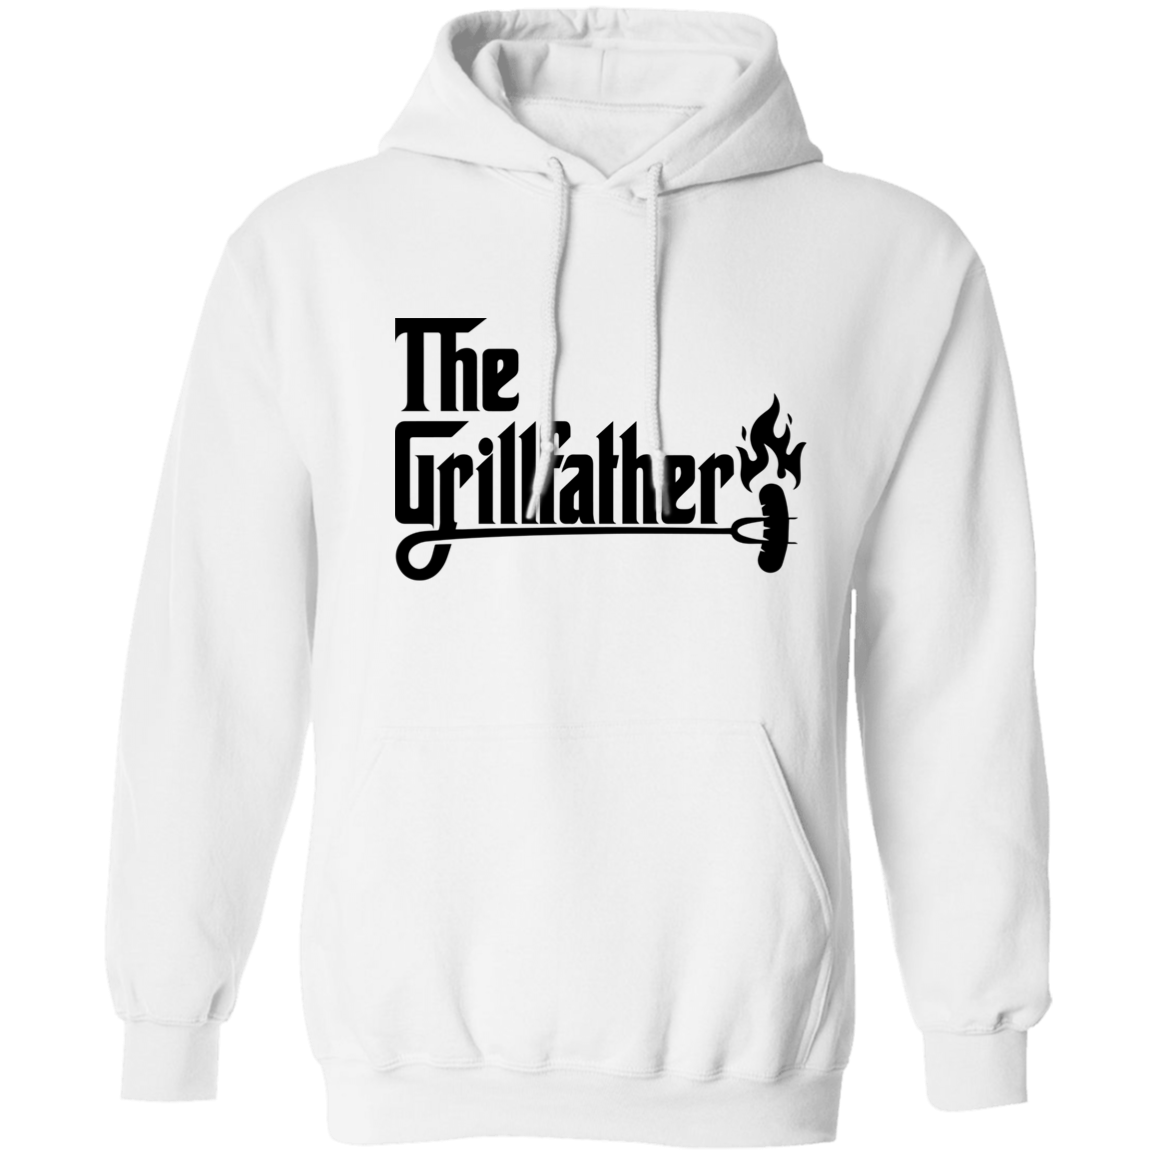 THE GRILLFATHER PULLOVER HOODIE